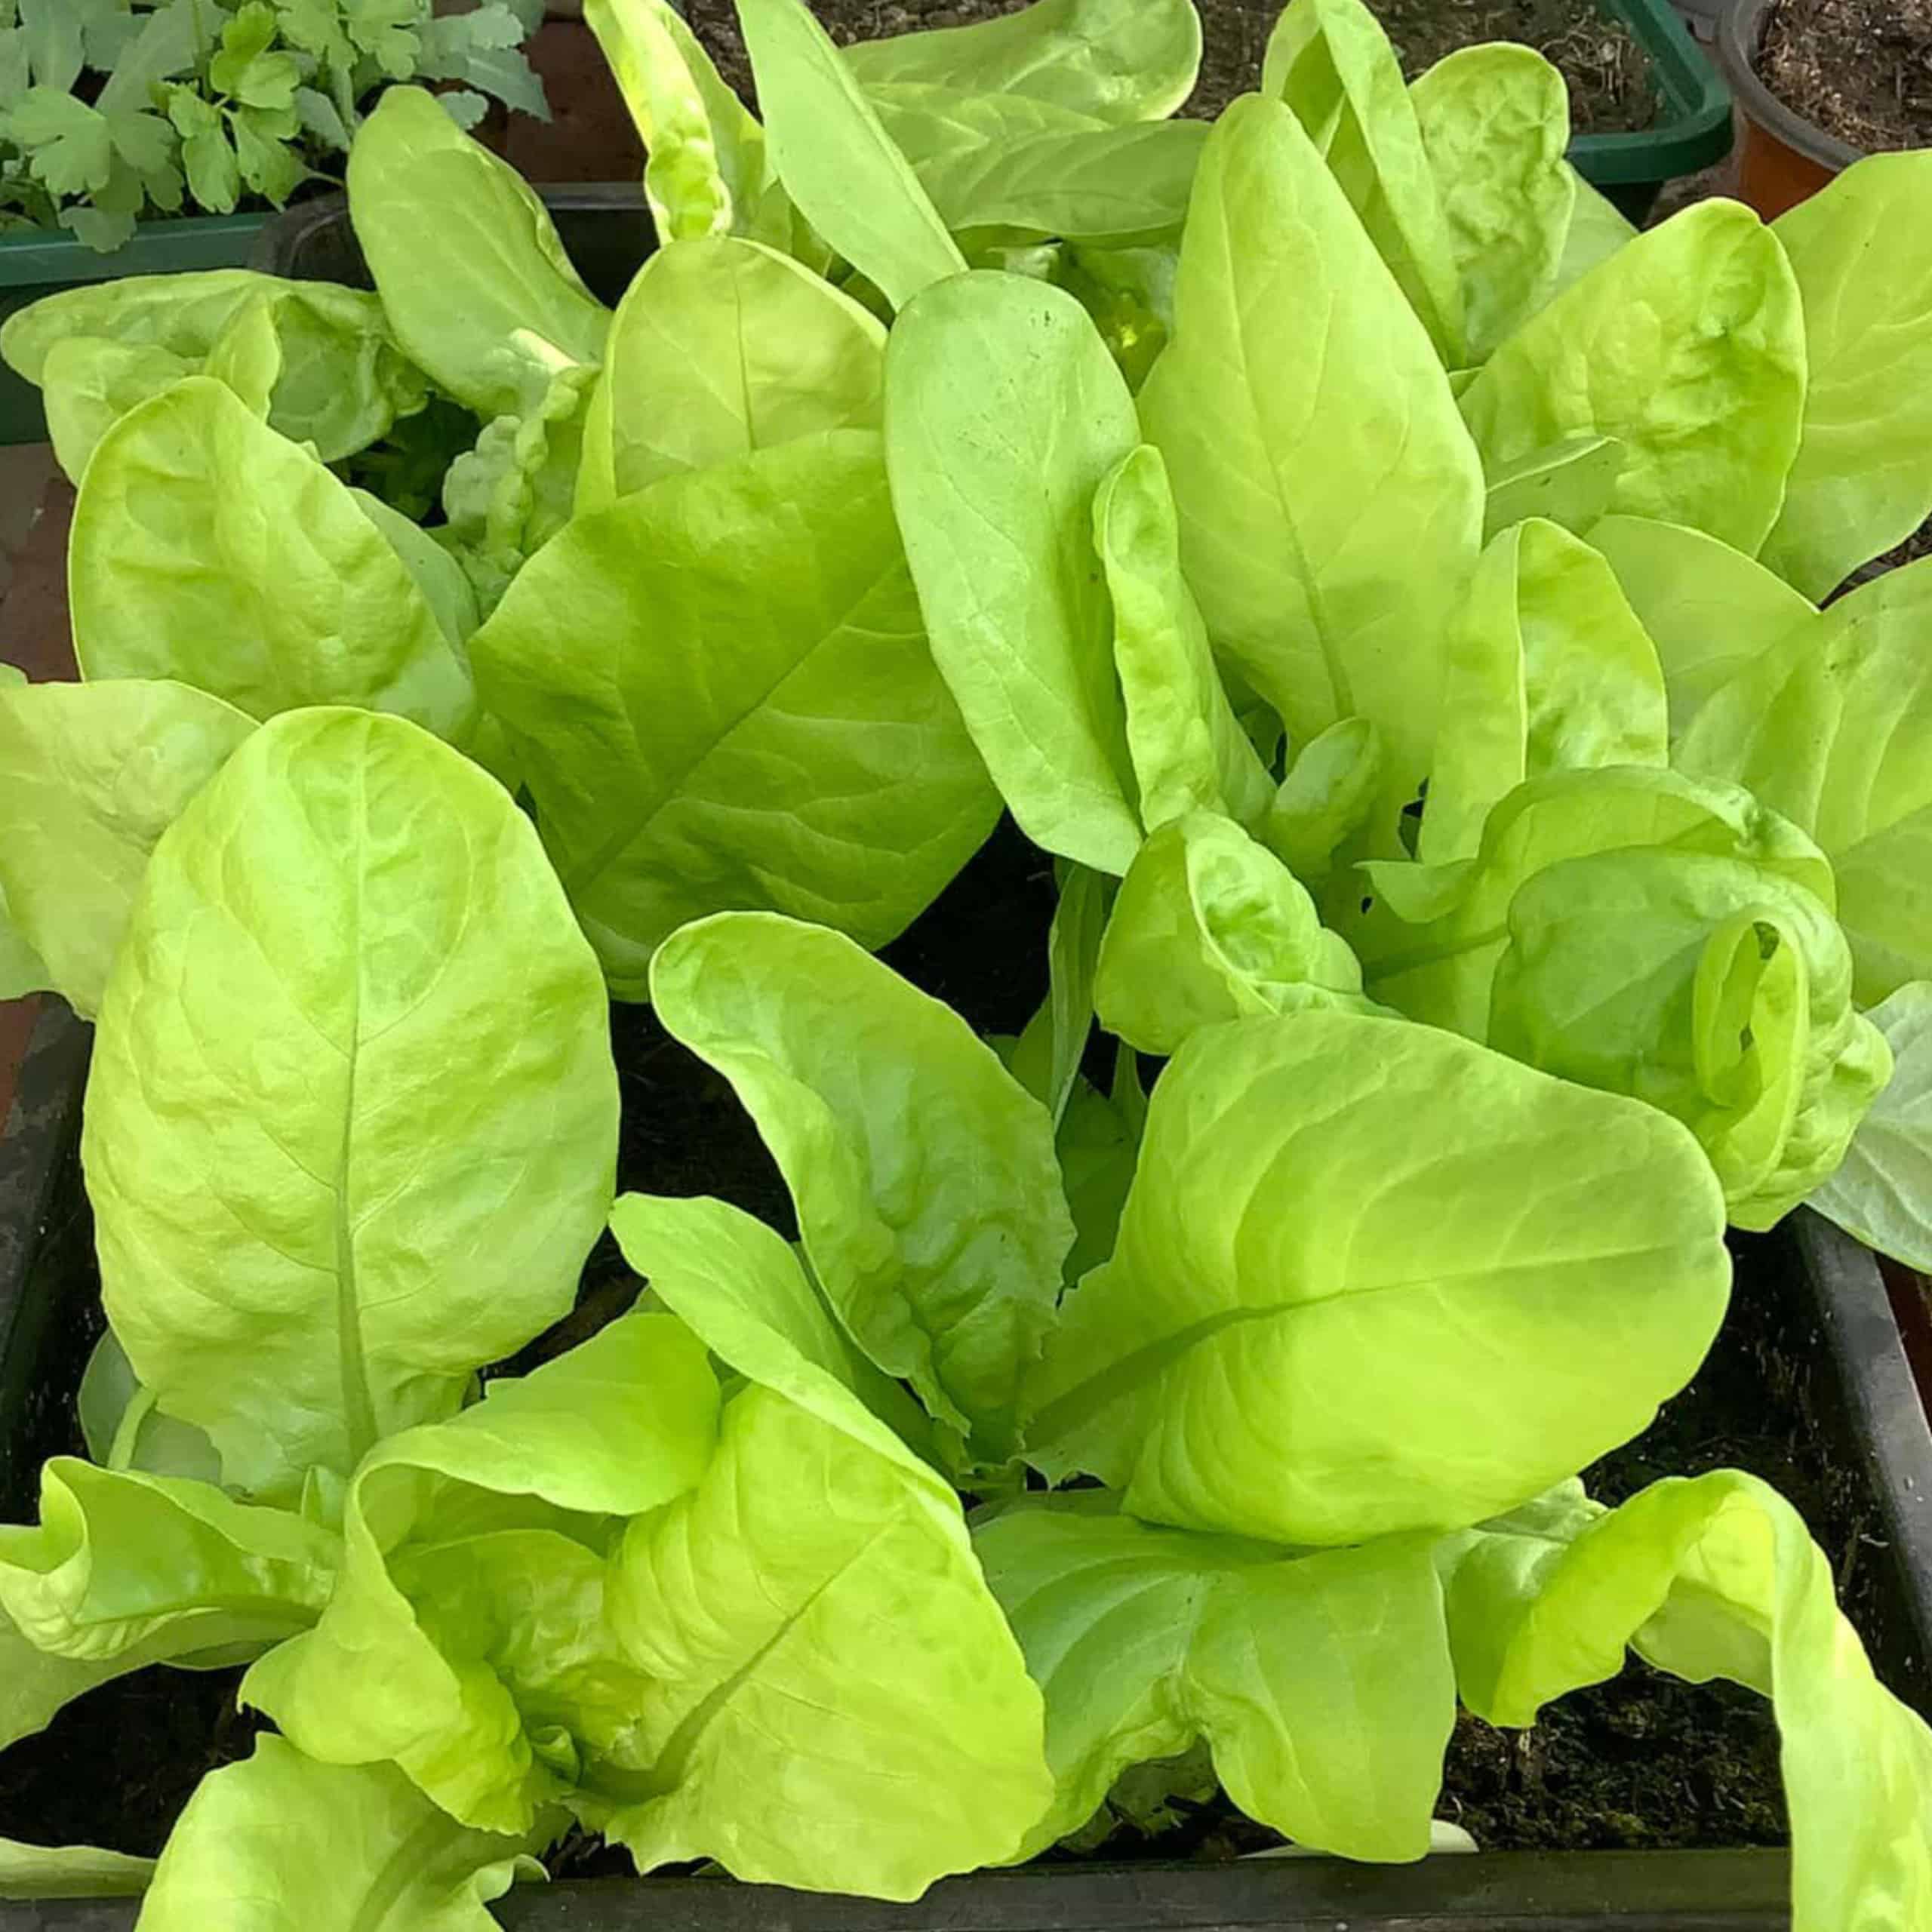 Homegrown lettuce from the Featherton House greenhouse in Deddington, Oxfordshire.